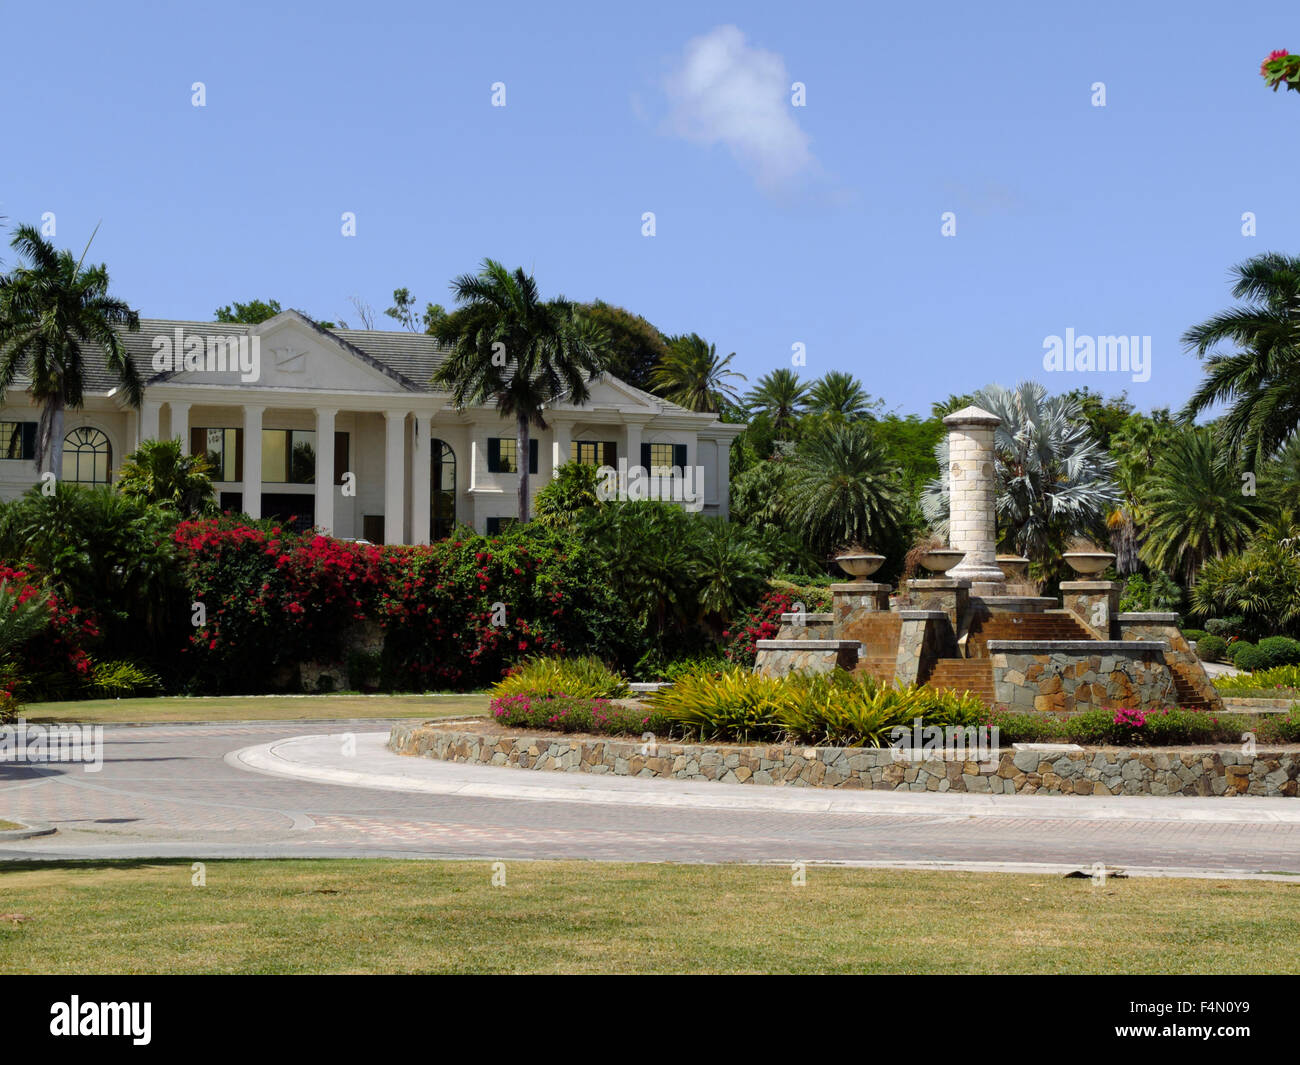 Antigua, Stanford cricket club or ground, airport, club house. Stock Photo